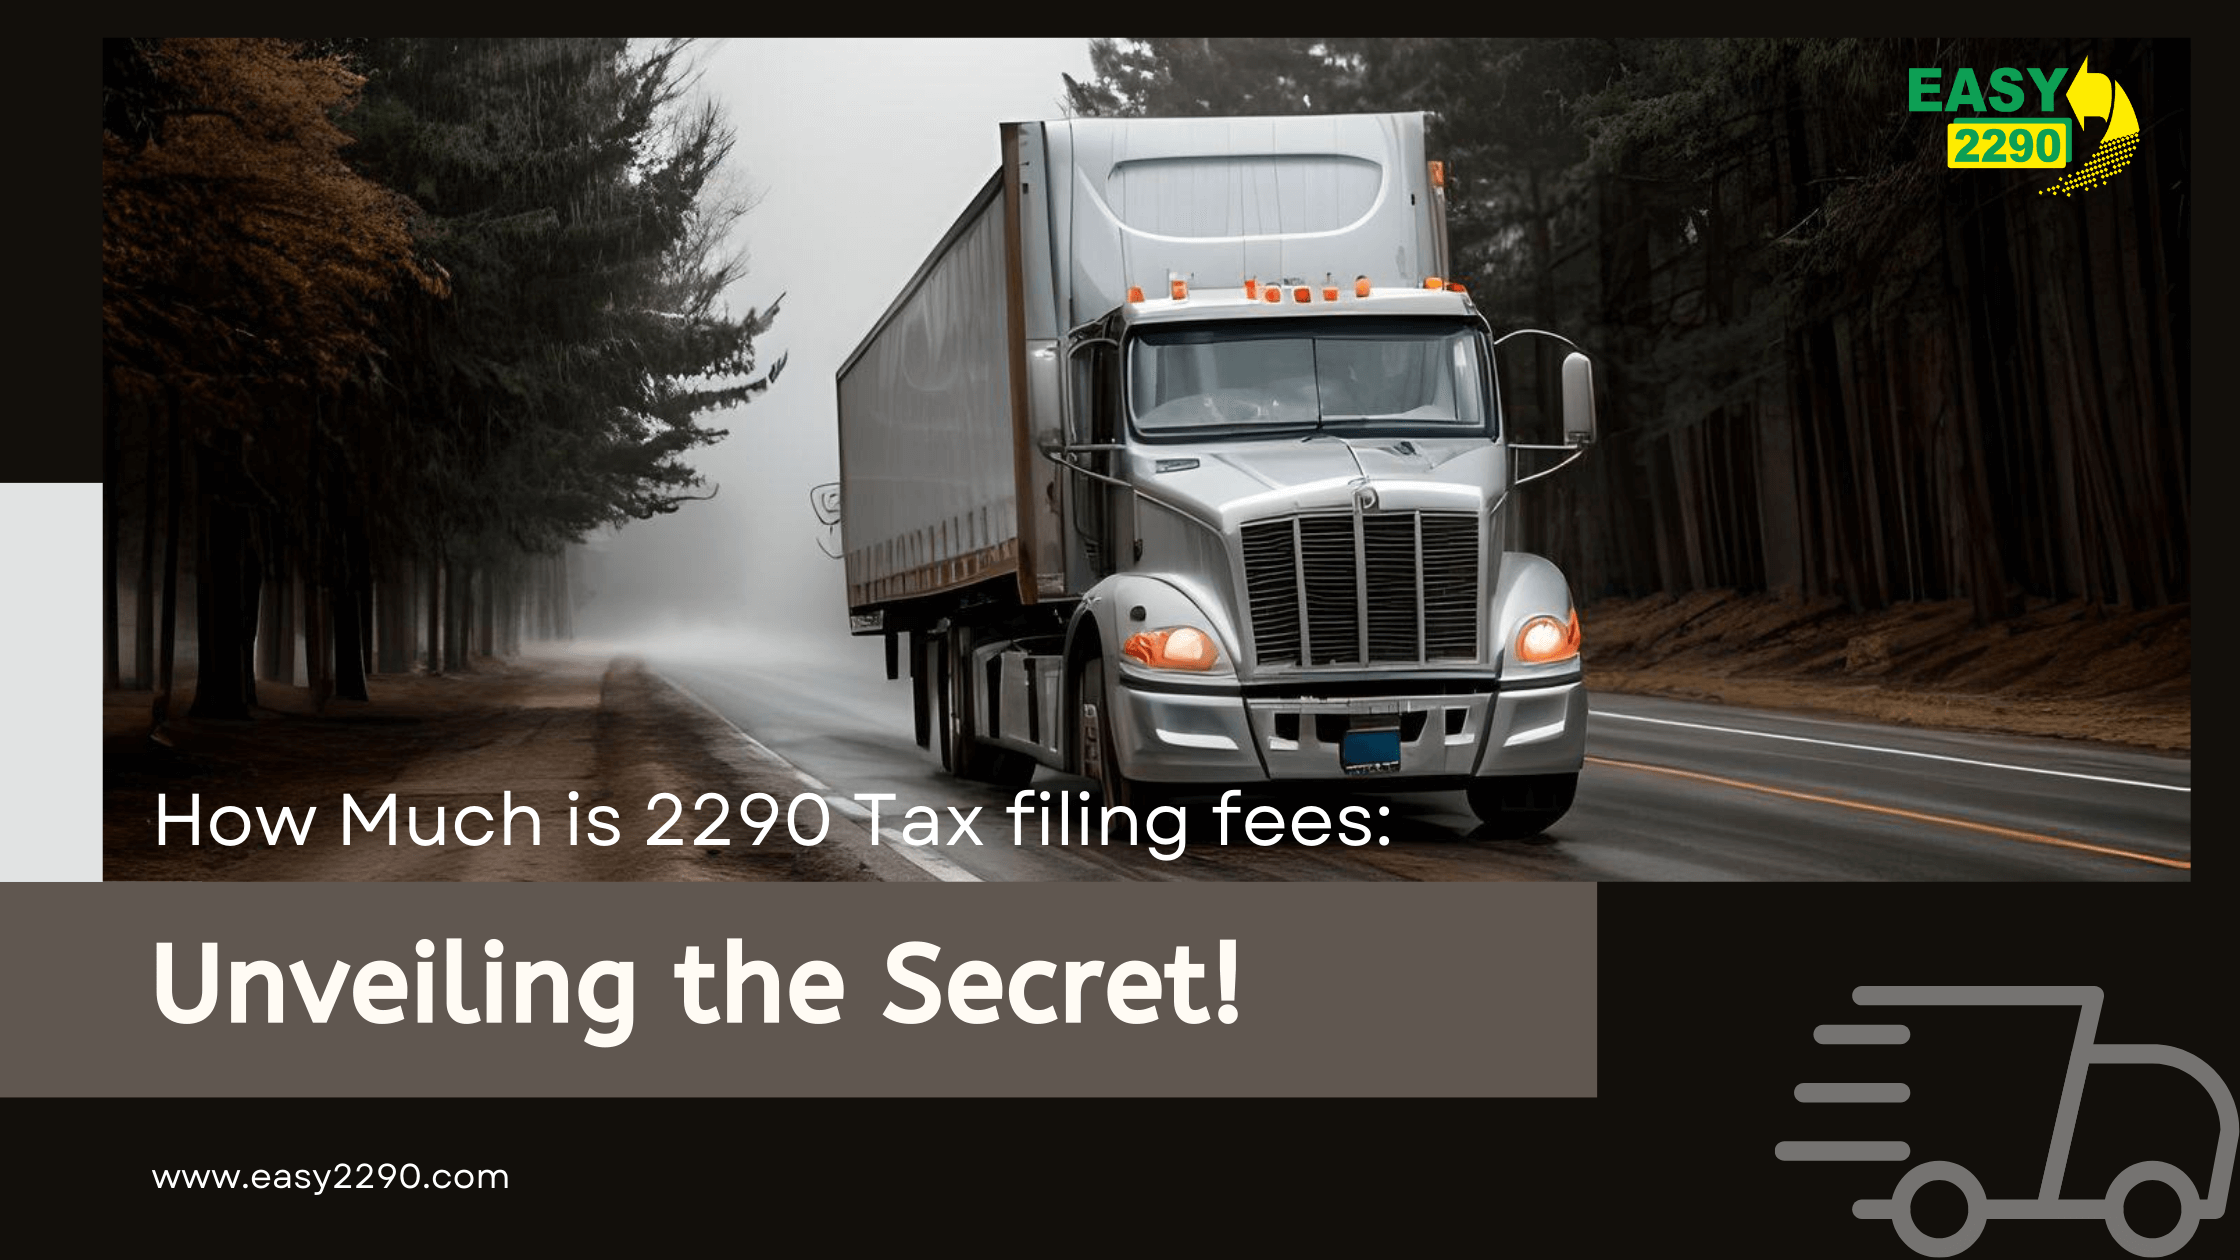 How much is 2290 Tax filing fees: Unveiling the secret.